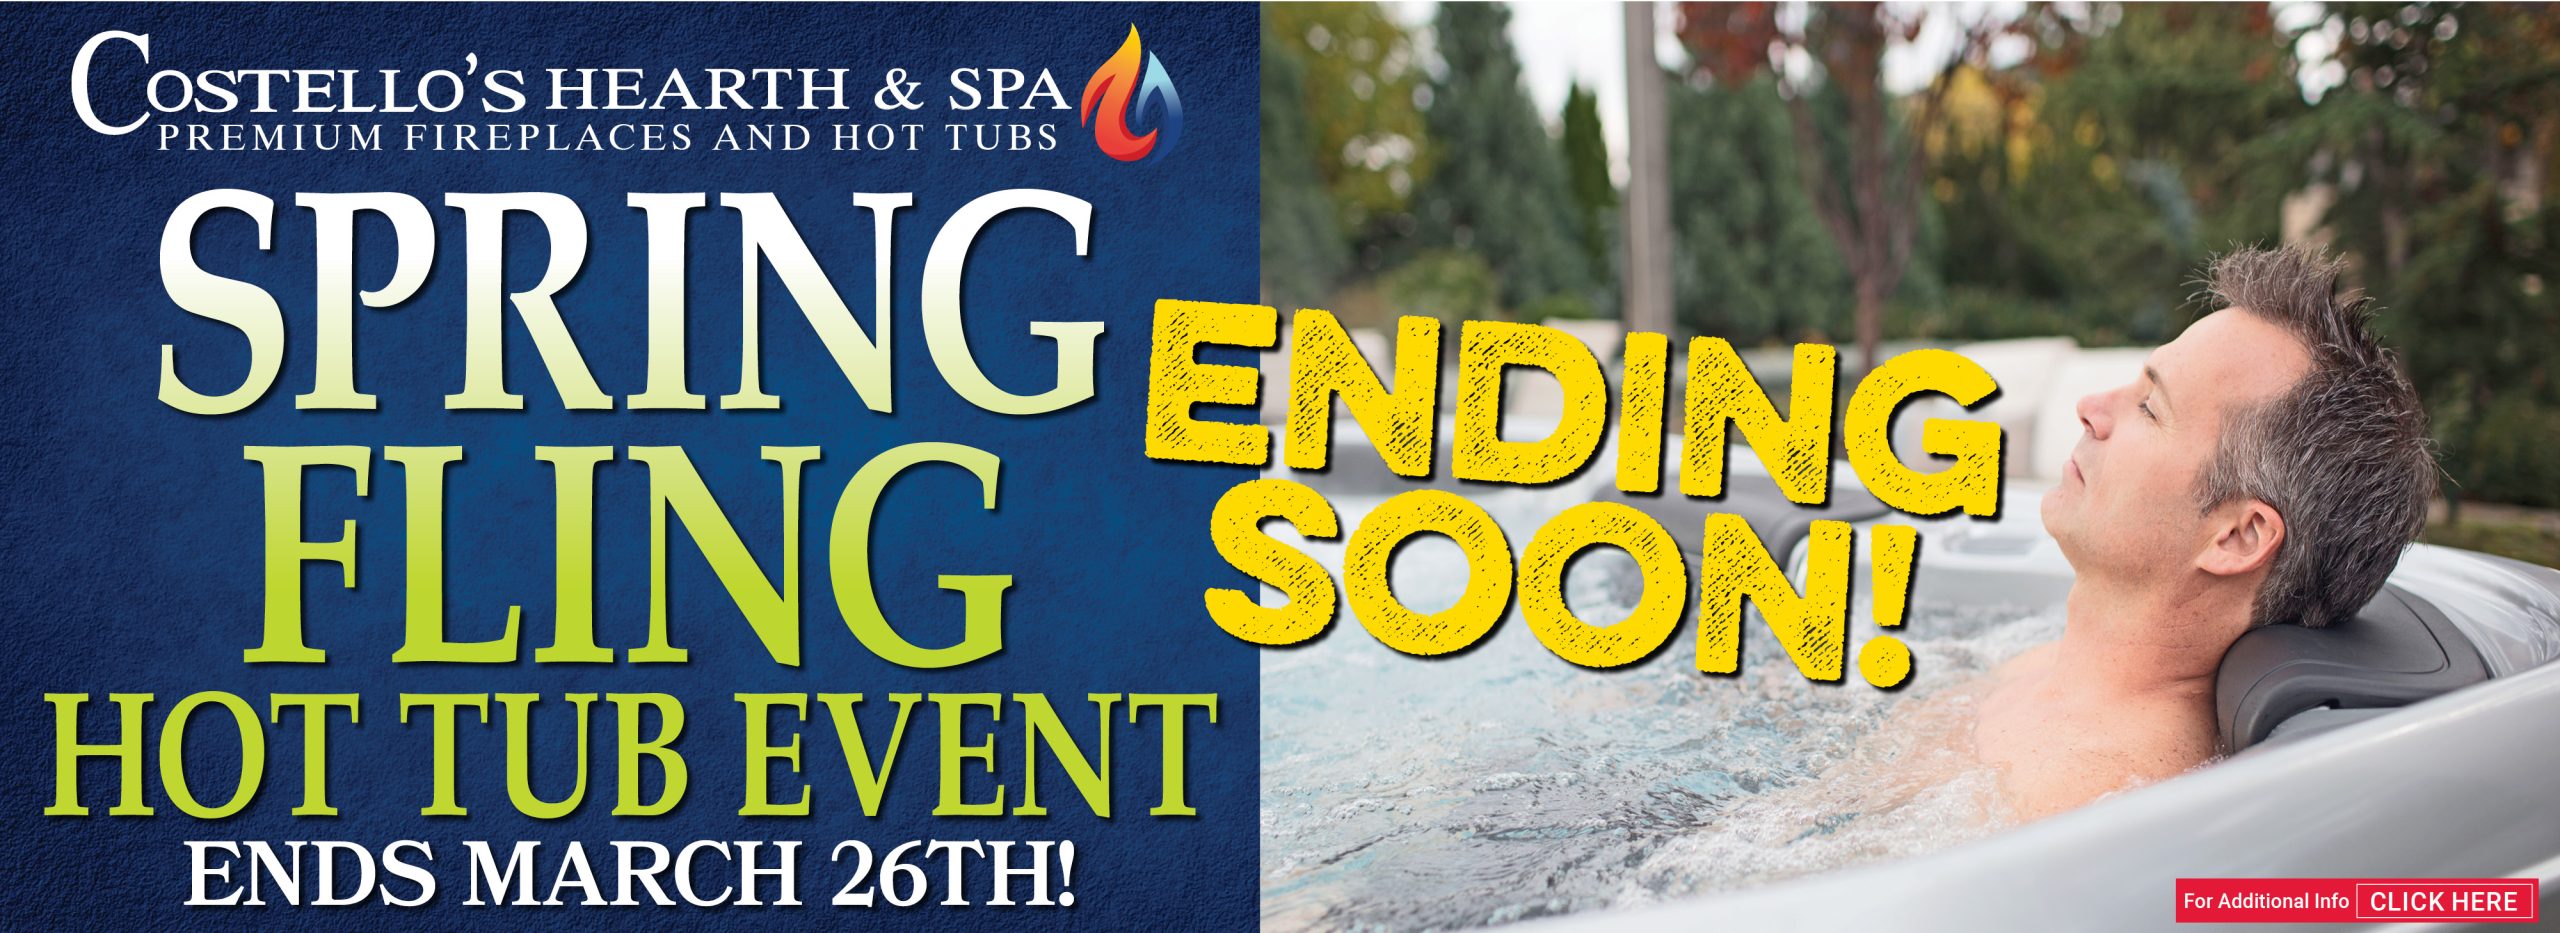 SPRINGFLING EVENT BANNERS3